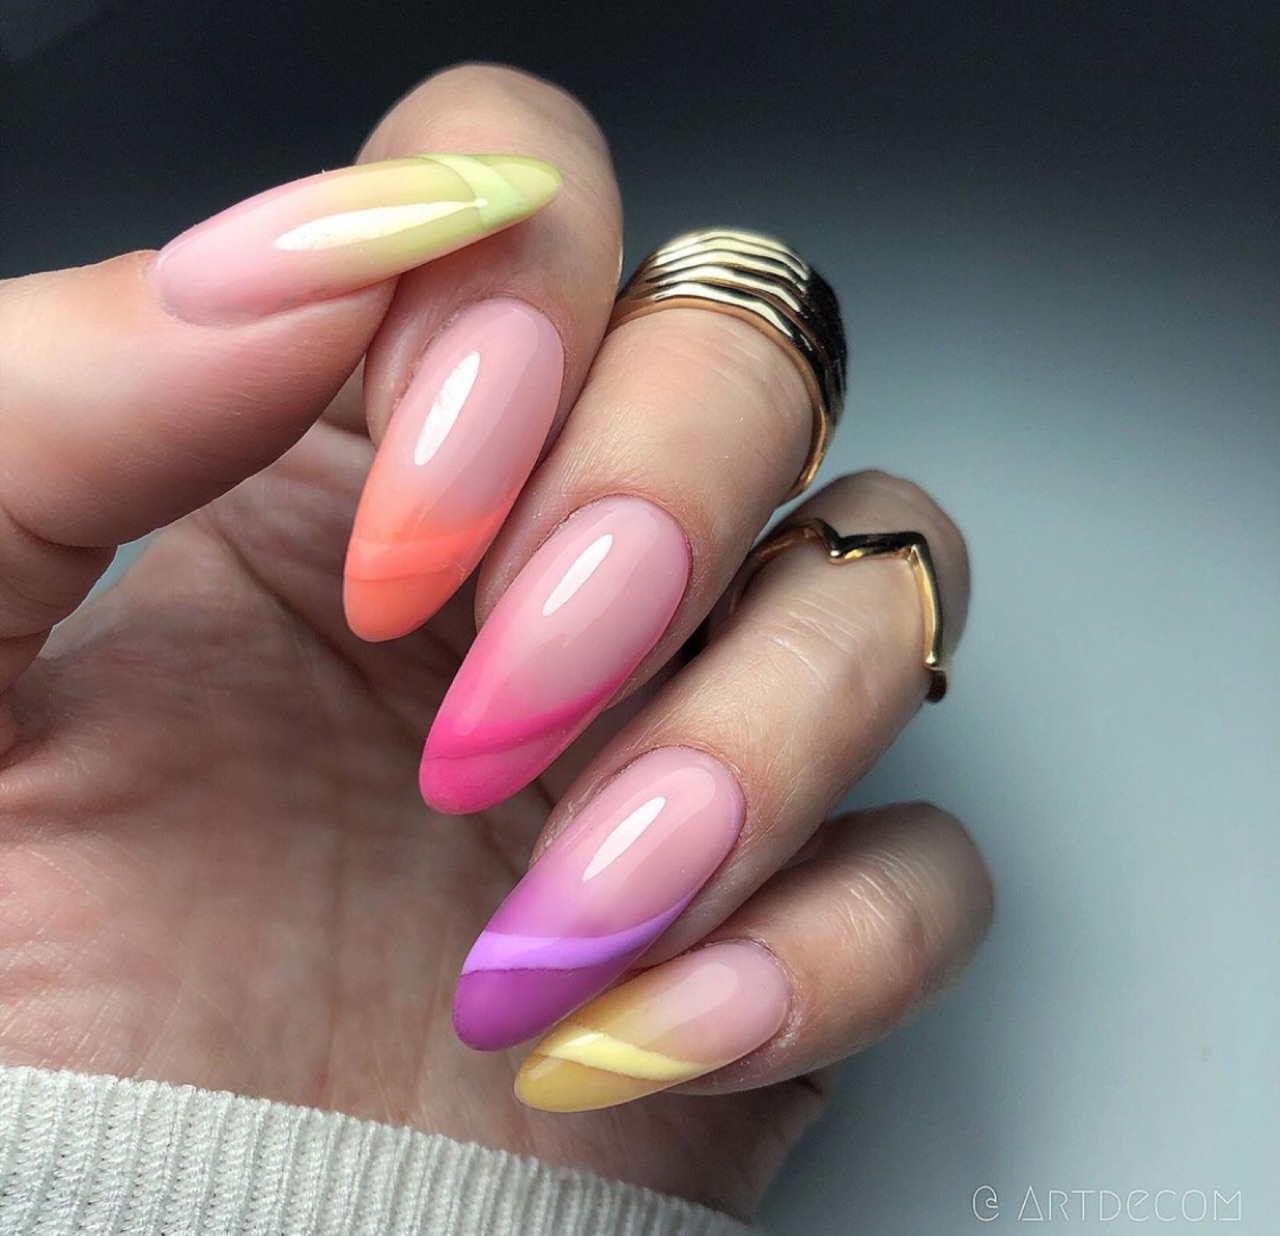 Bright pastel manicure on long, oval nails